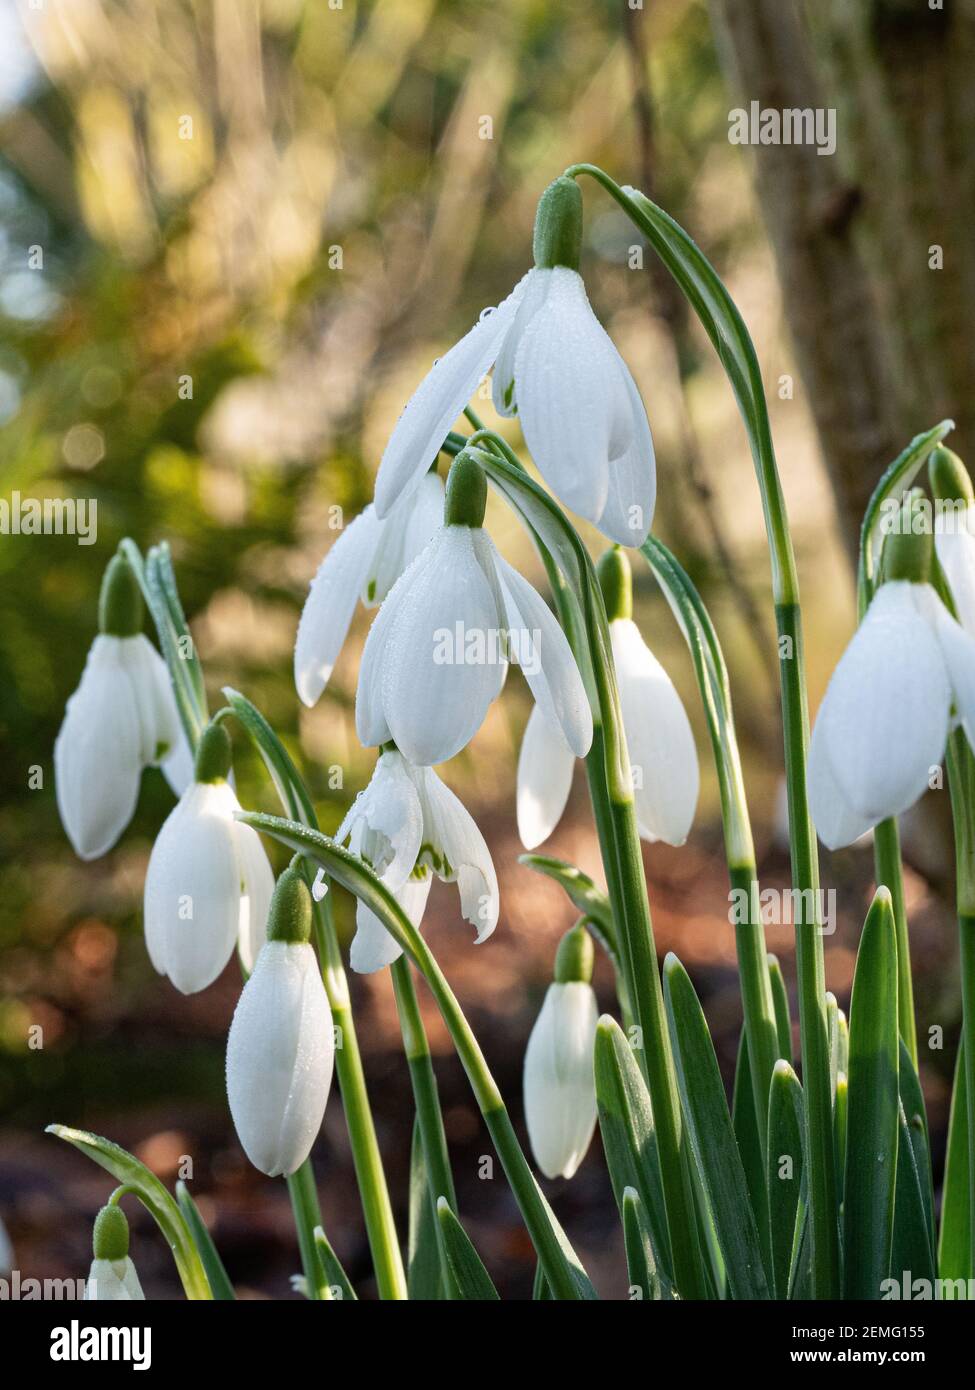 A close up of a small group of single snowdrop - Galanthus nivalis flowers Stock Photo